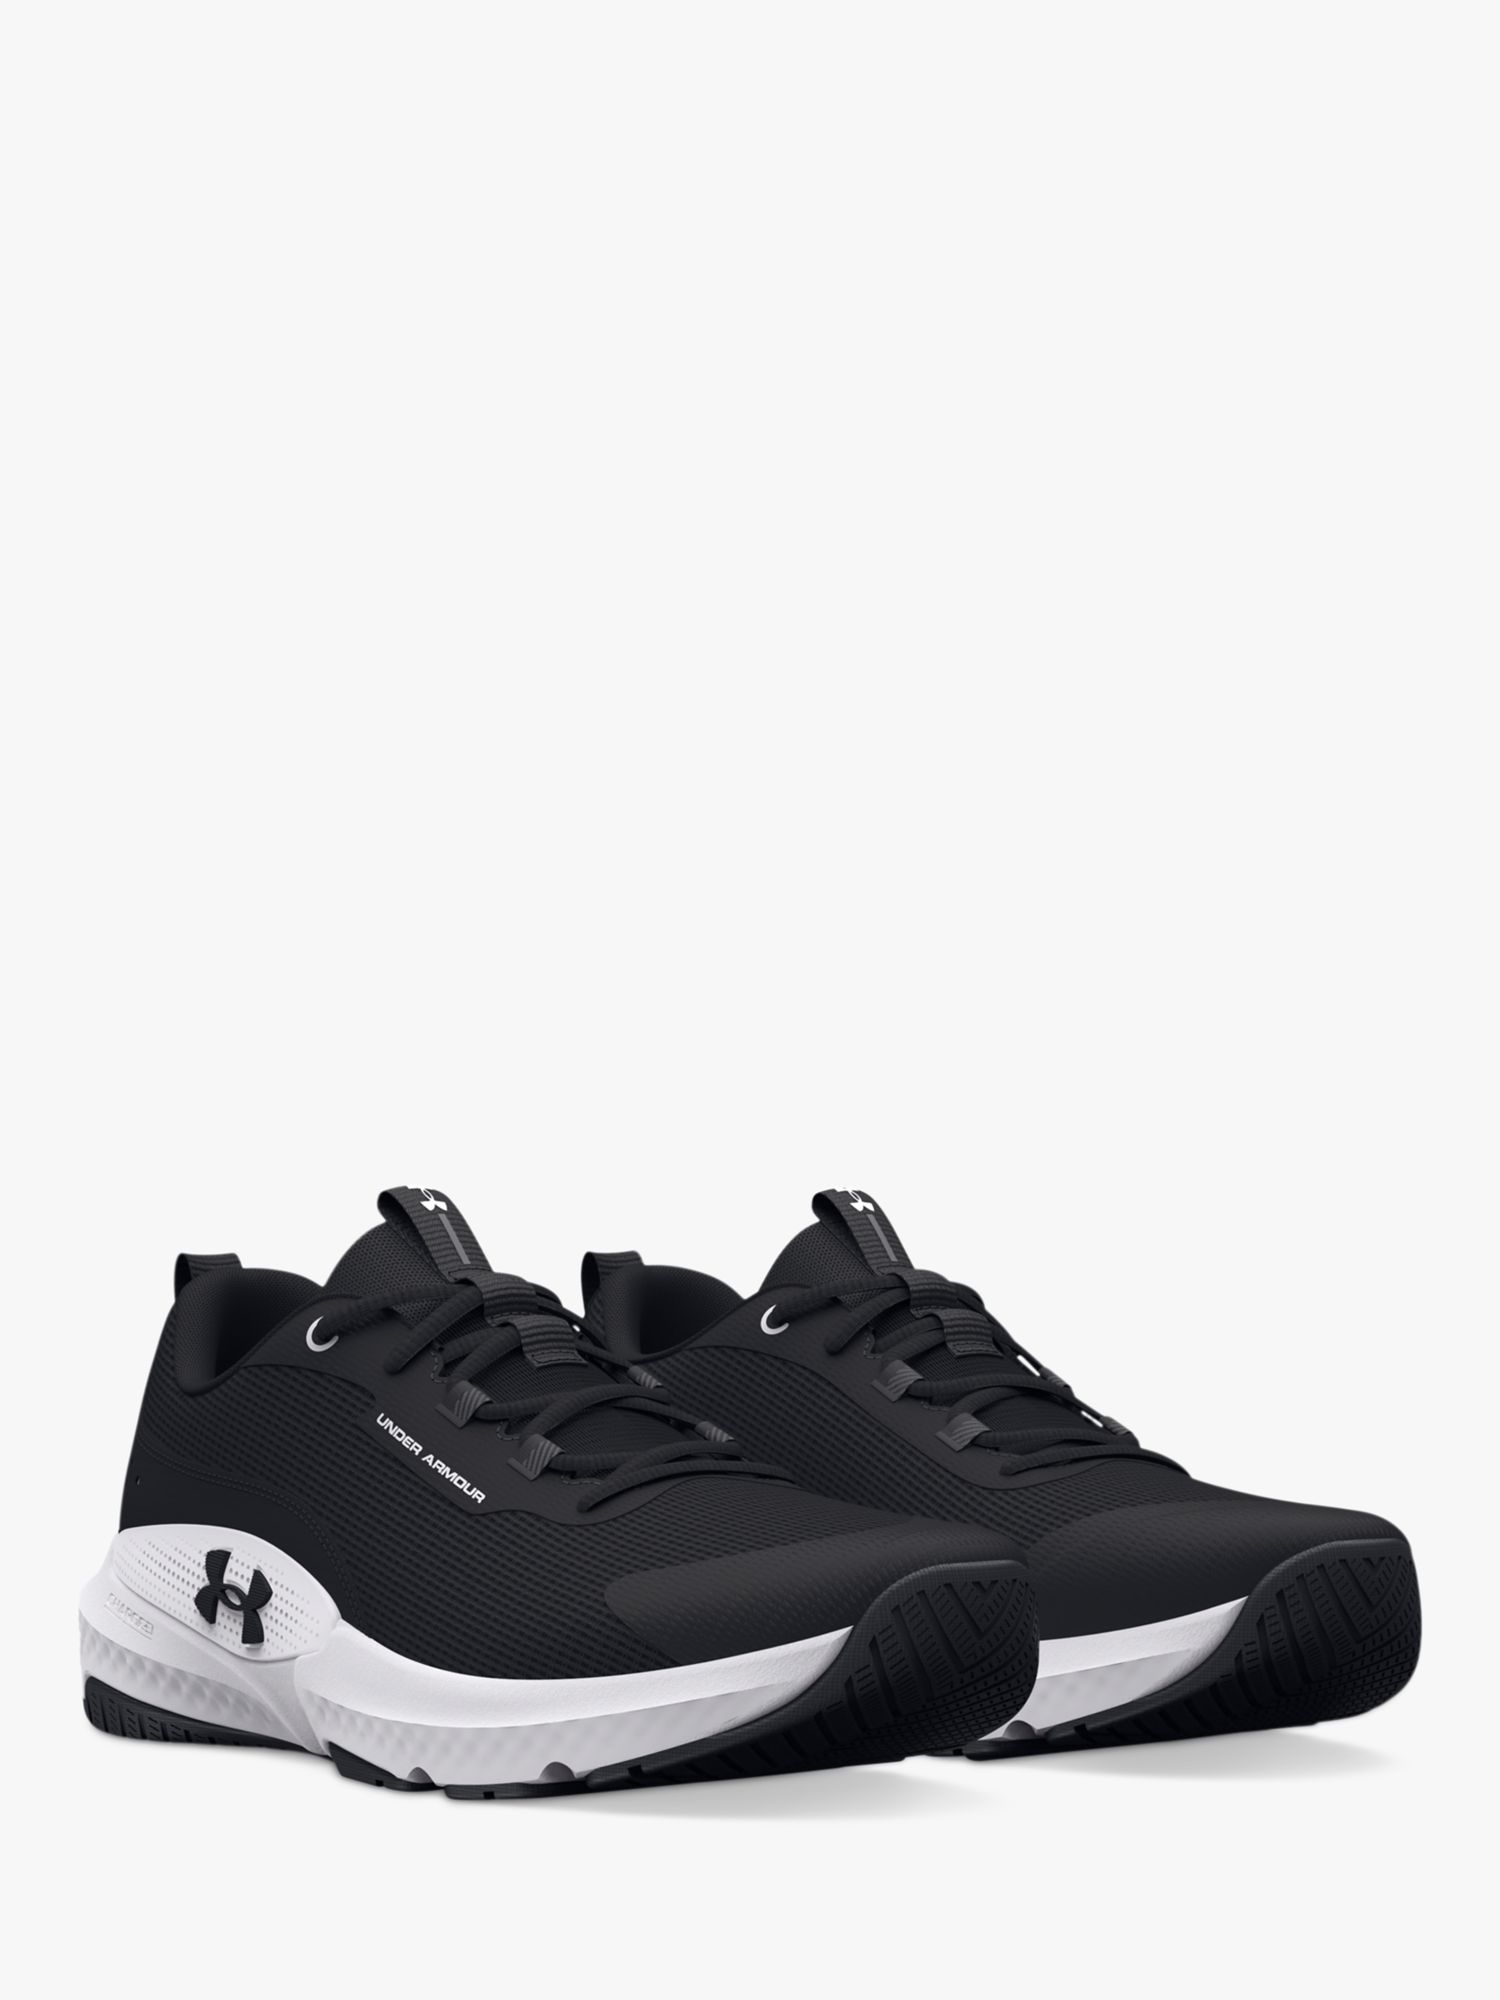 Under Armour Dynamic Select Men's Cross Trainers, Black/White, 7